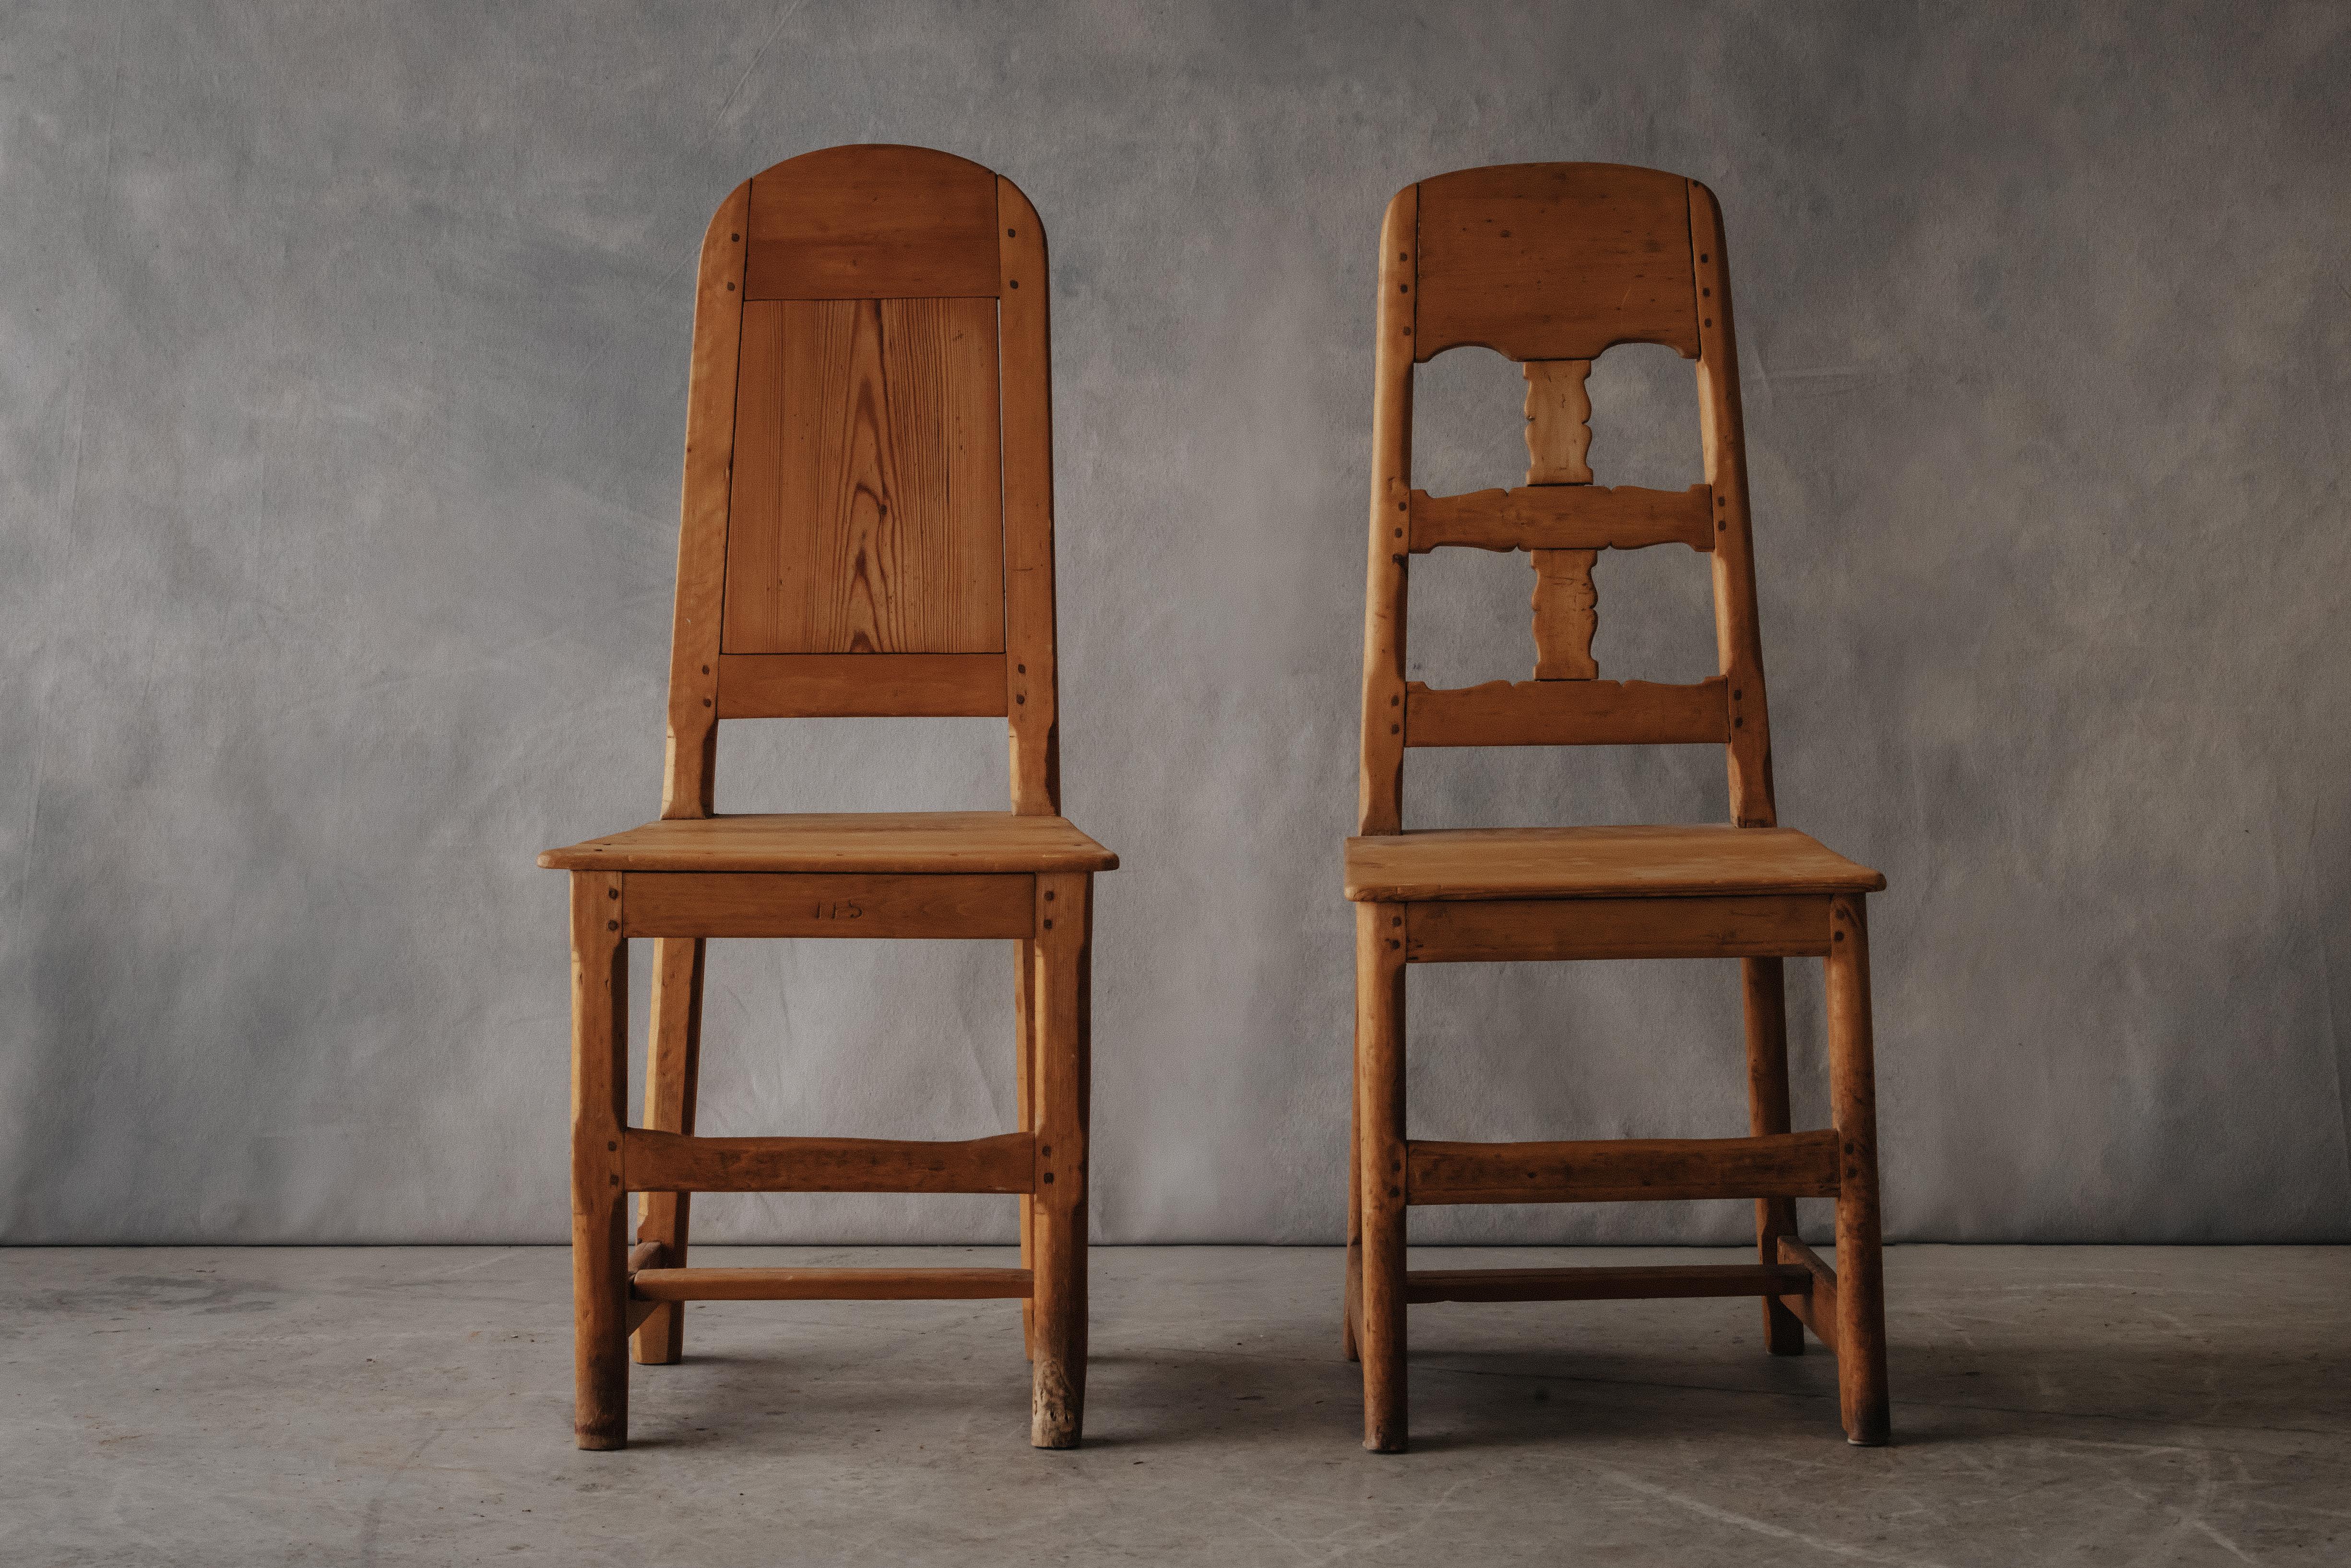 Early Set of Swedish Folk Chairs, Circa 1800.  Solid pine construction with nice wear and use.  Measurement is for chair on left.  Chair on right measures:
H - 41 / W - 17 / D - 18.5 / S - 18